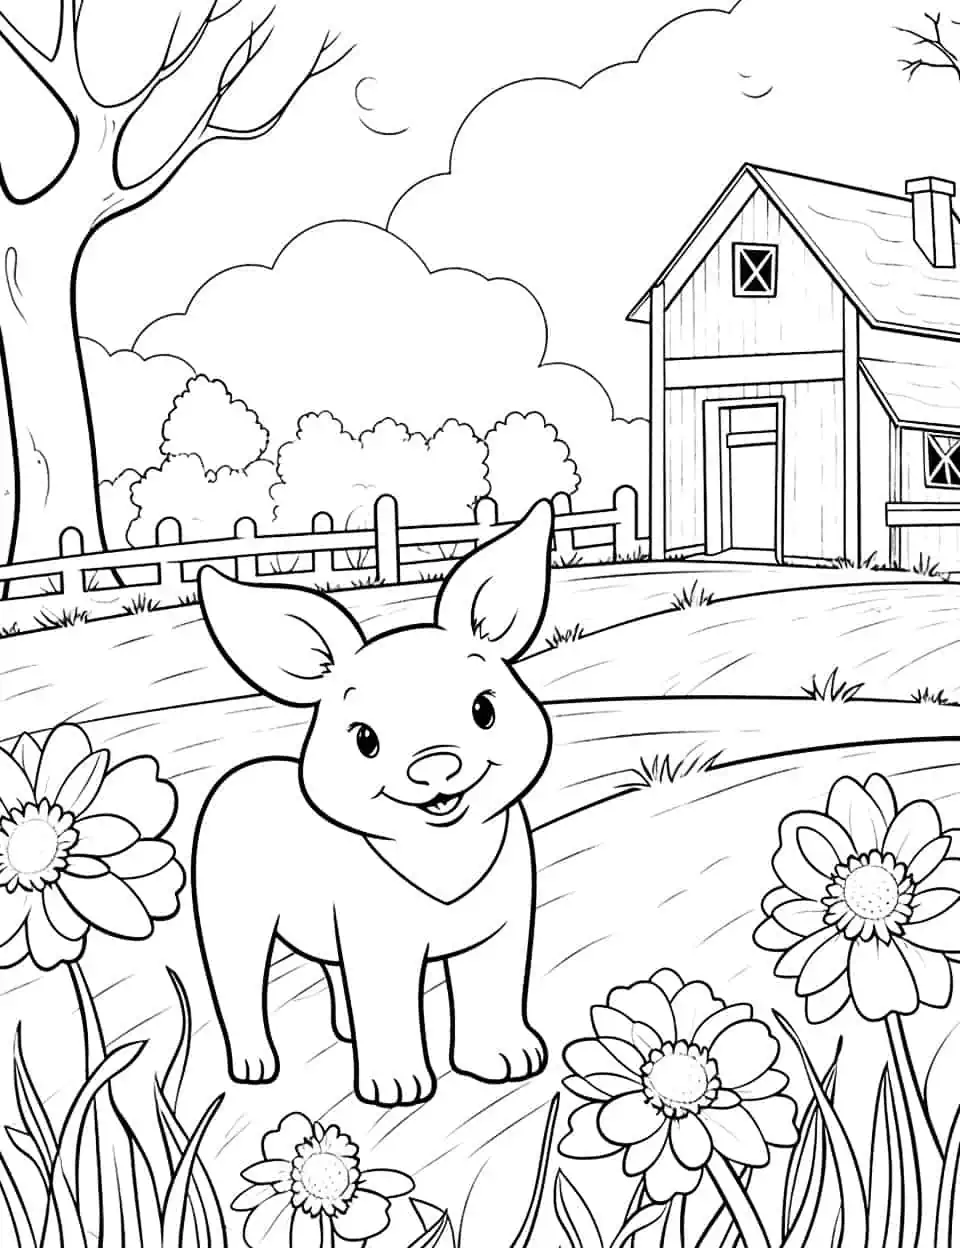 Spring Farm Visit Coloring Page - A detailed coloring page featuring a spring day visit to a farm with baby animals.